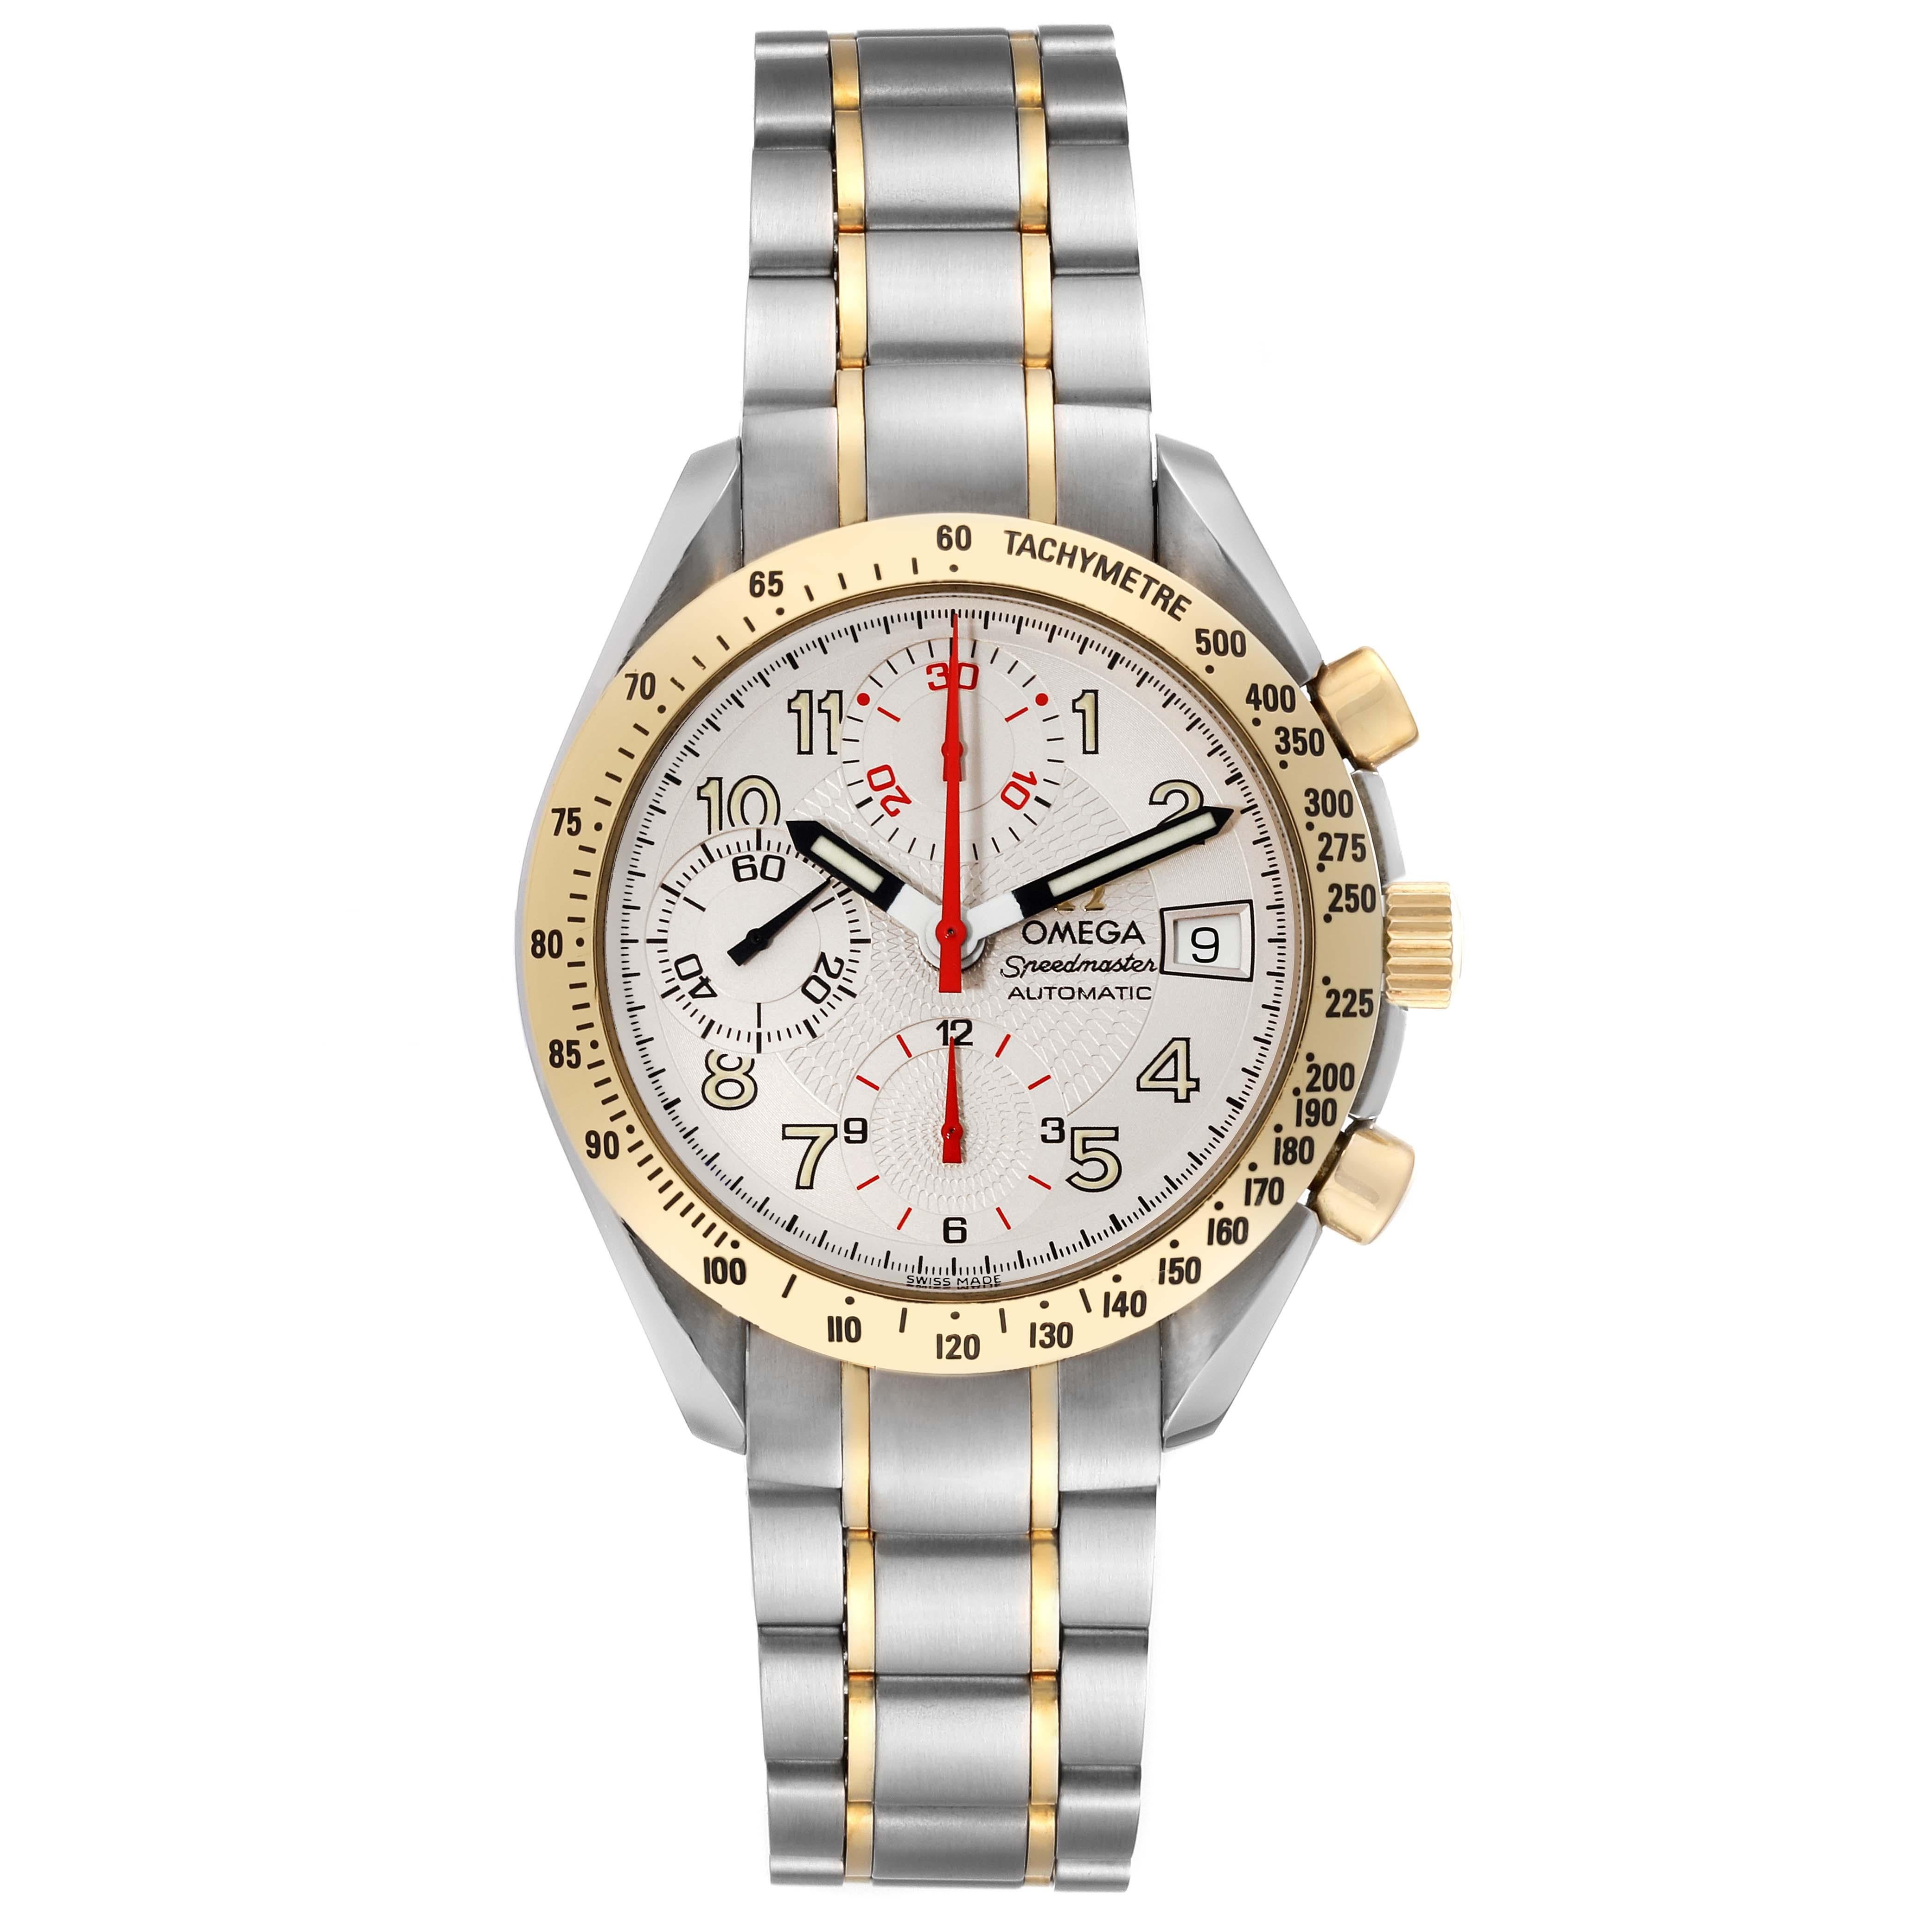 Omega Speedmaster Japanese Market Limited Edition Steel Yellow Gold Mens Watch 3313.33.00. Automatic self-winding chronograph movement. Caliber 1152. Stainless steel and 18k yellow gold case 39.0 mm in diameter. Omega logo on crown. 18k yellow gold